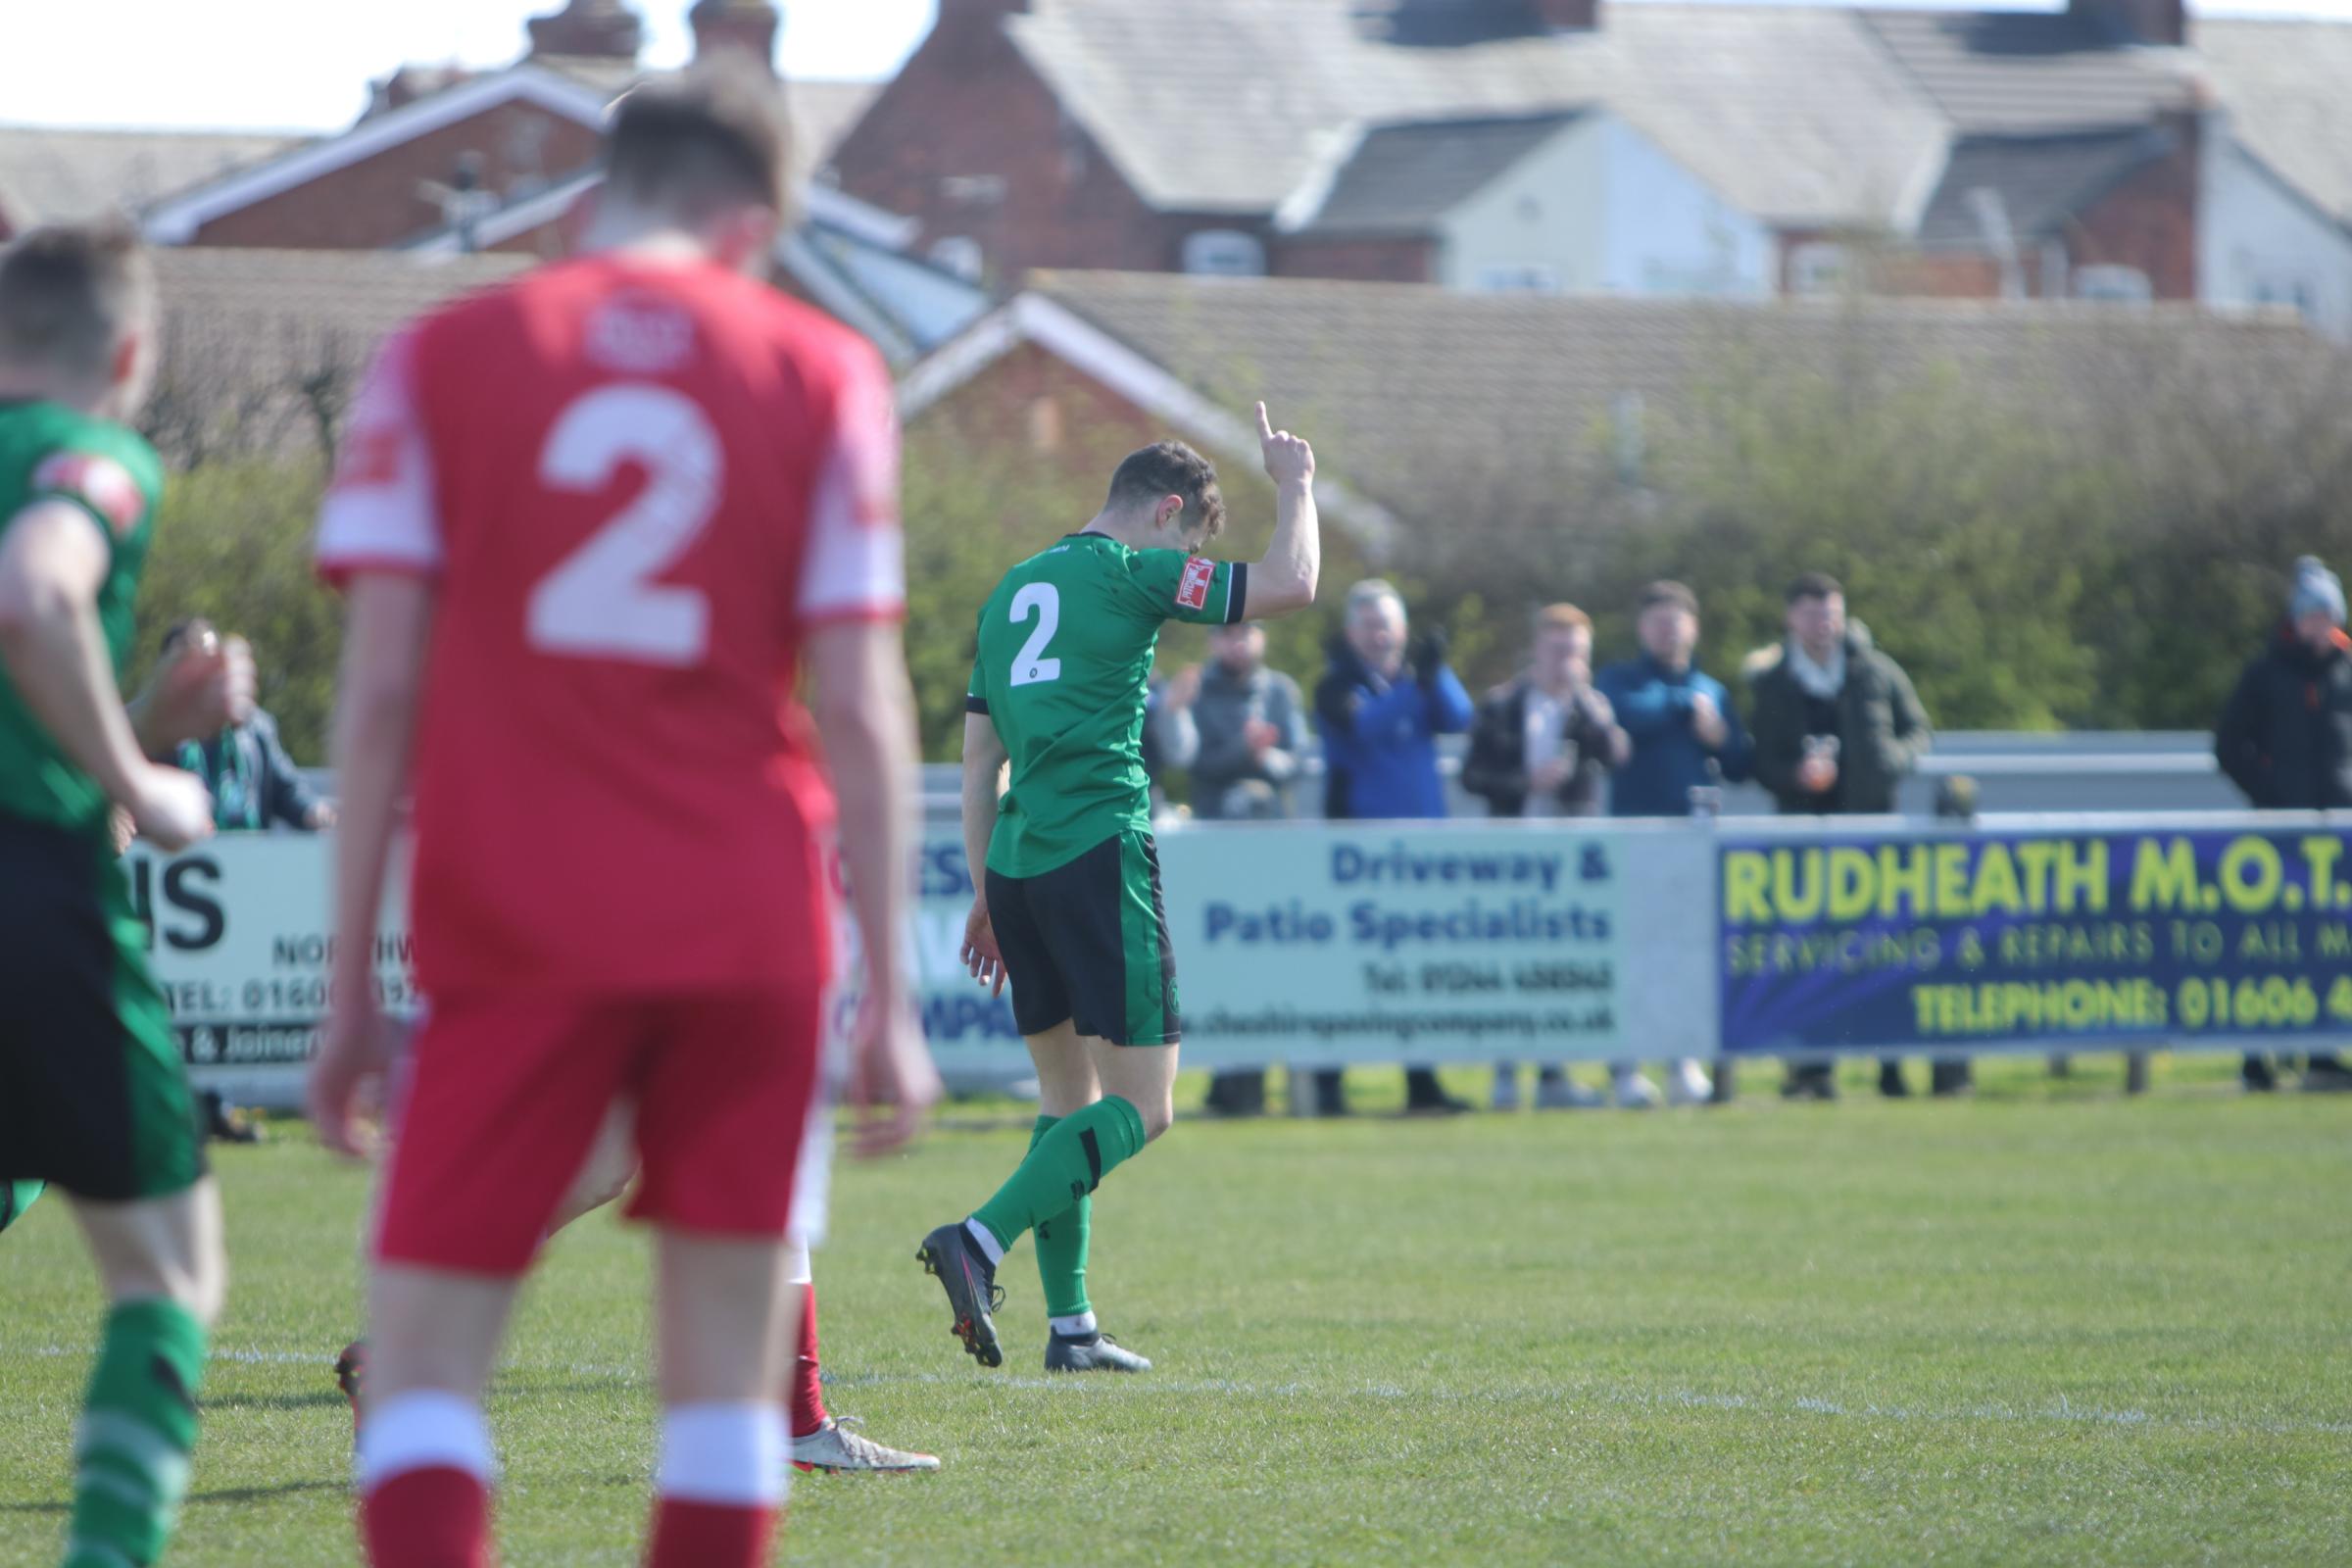 Mike Koral goal, 1874 Northwich 7 Market Drayton Town 0. Pictures: Xenia Simpson Photography